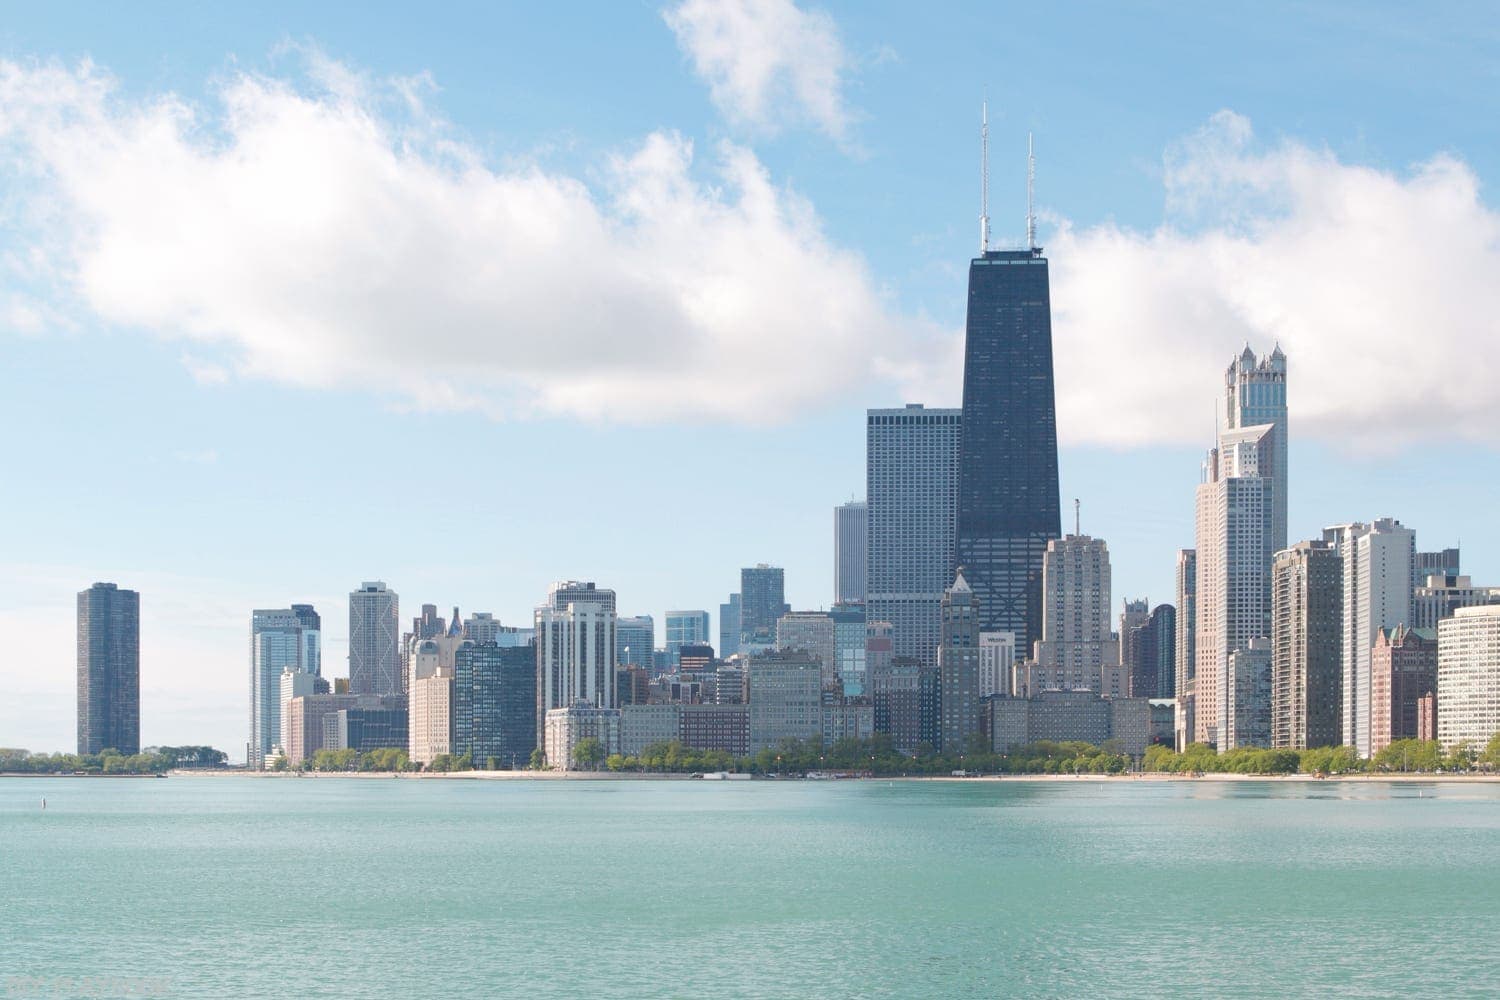 Skyline of the city of chicago